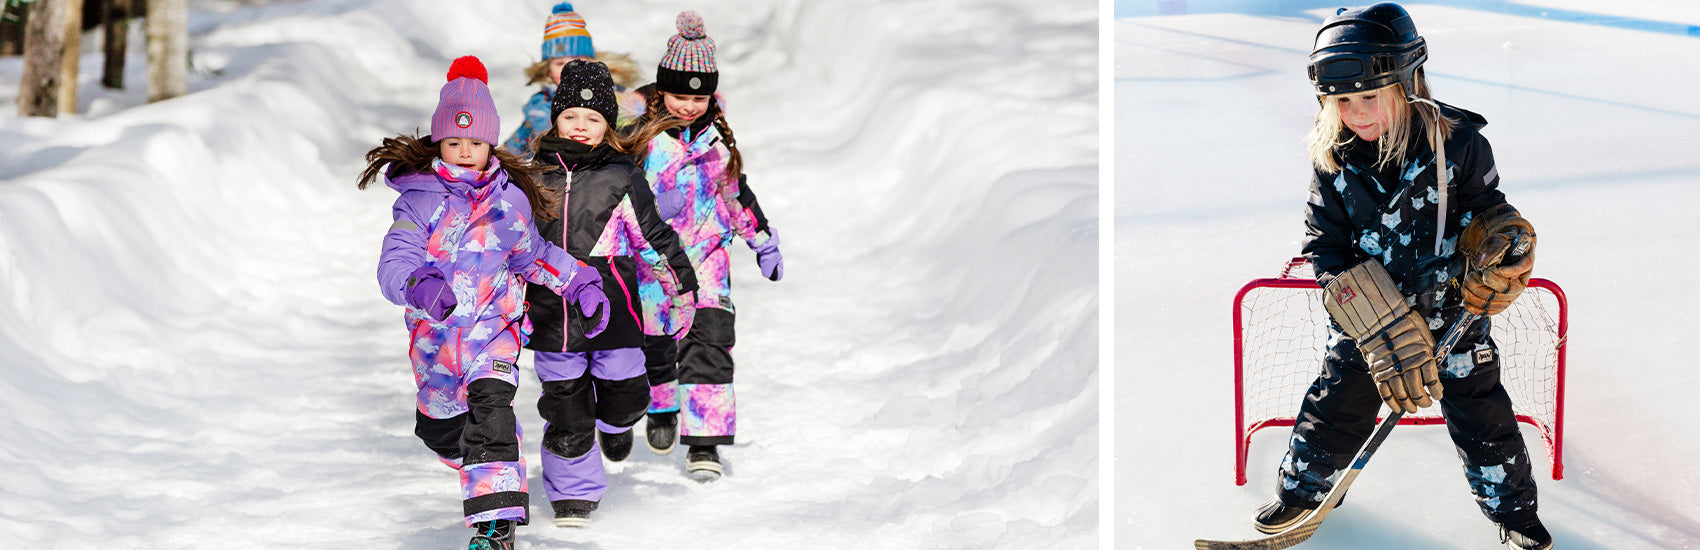 2014 snow outfits (let's just pretend it's winter!) - polienne